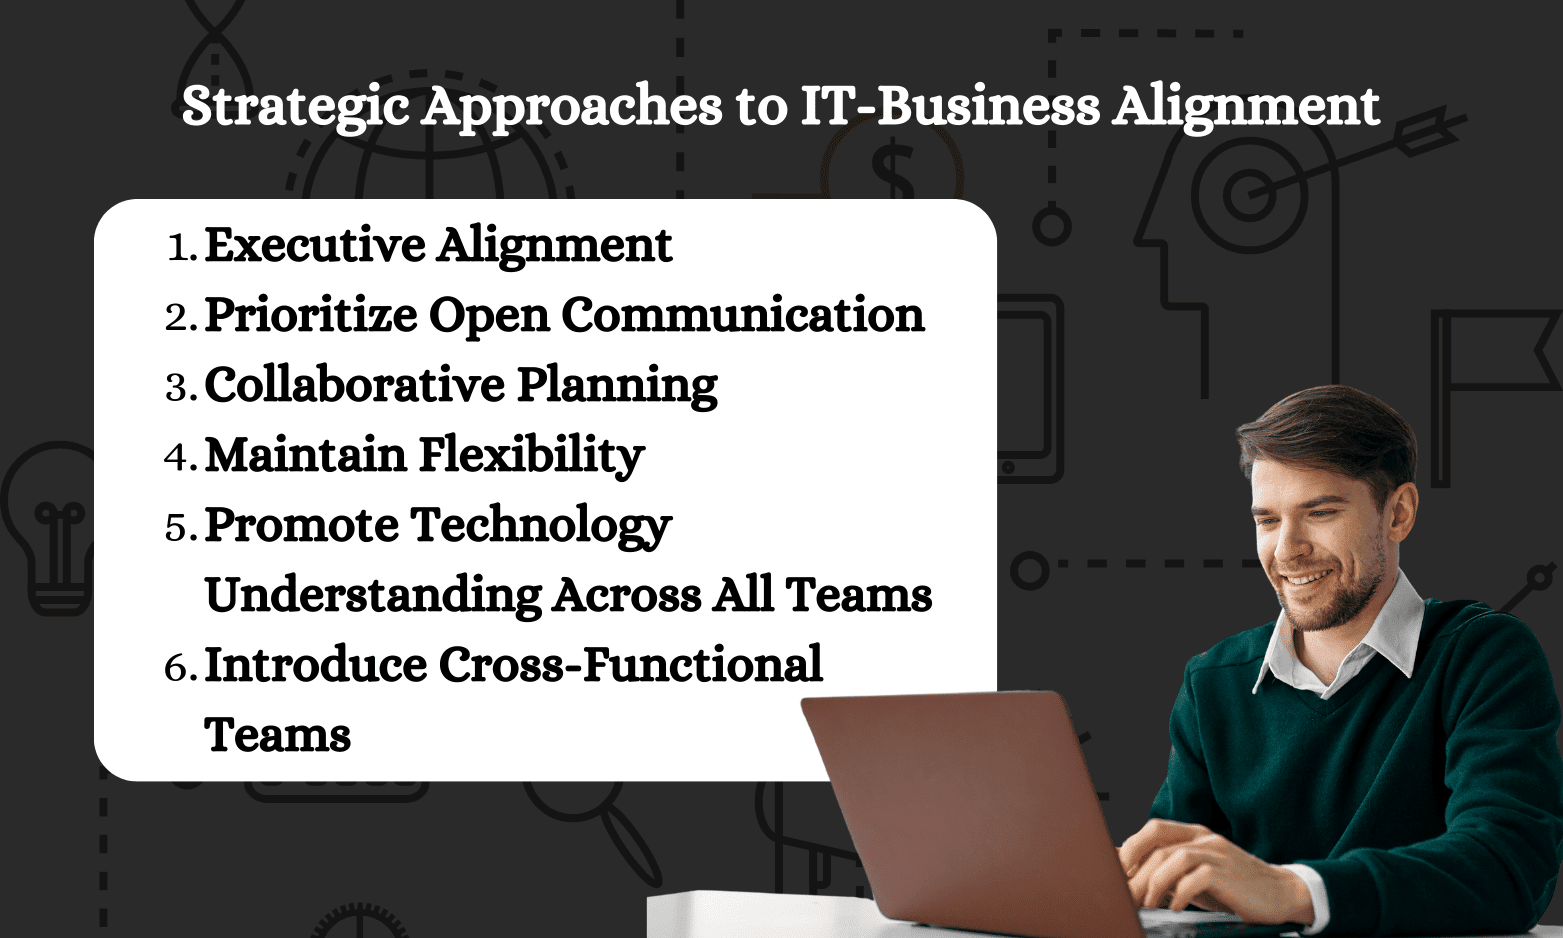 Strategic Approaches to IT Business Alignment